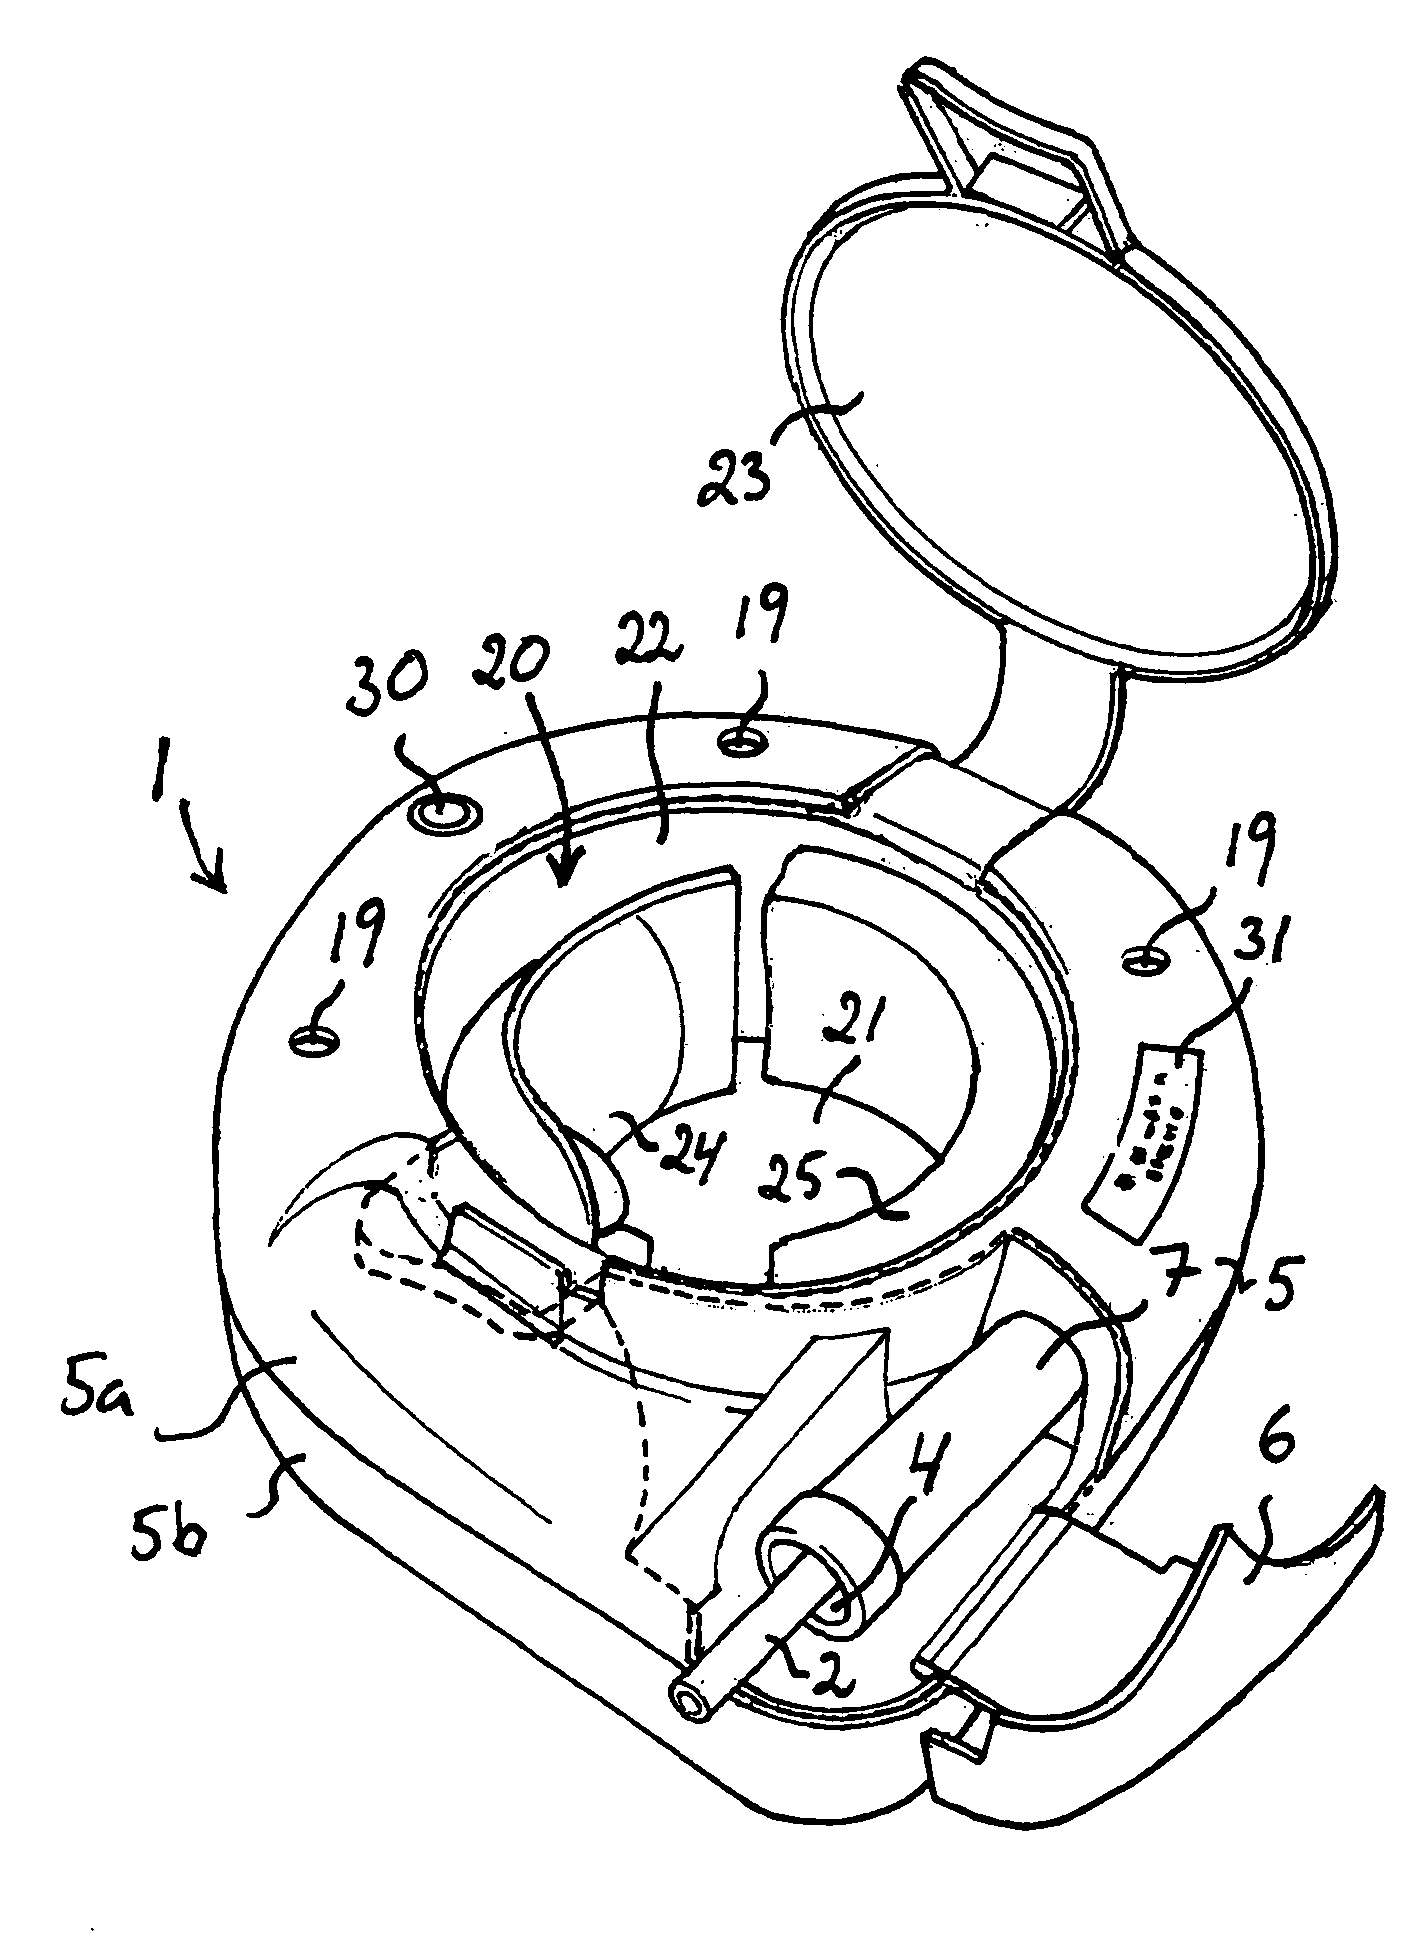 Receptacle for a Catheter